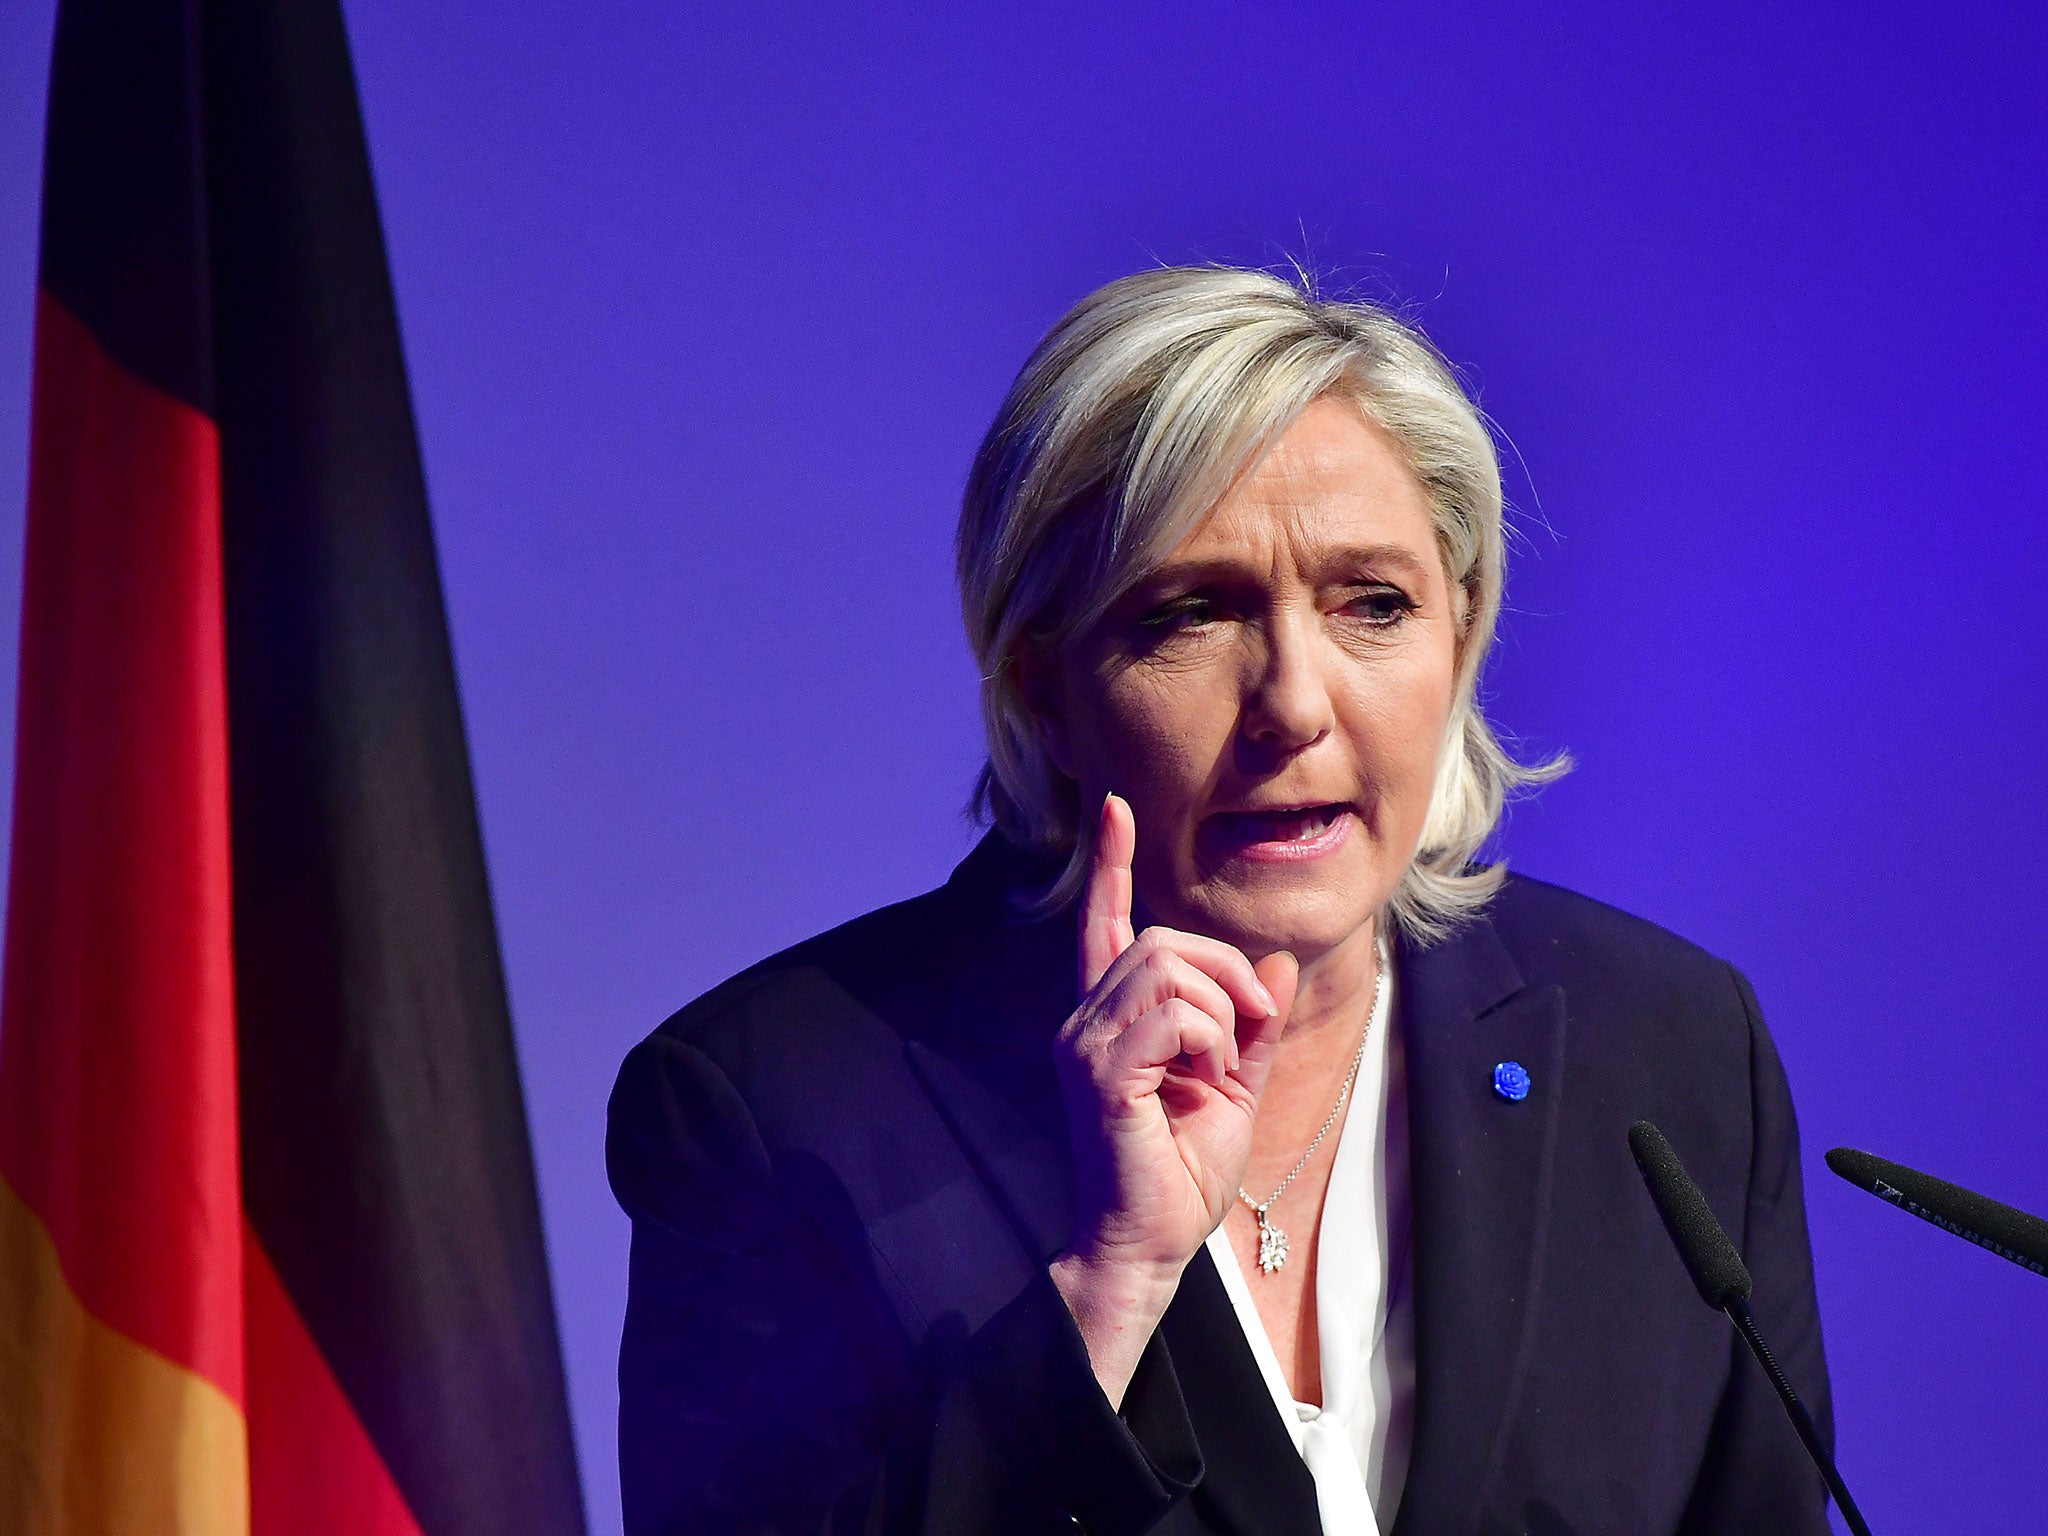 Marine Le Pen, leader of the French Front National party, is now a credible contender for the French presidency